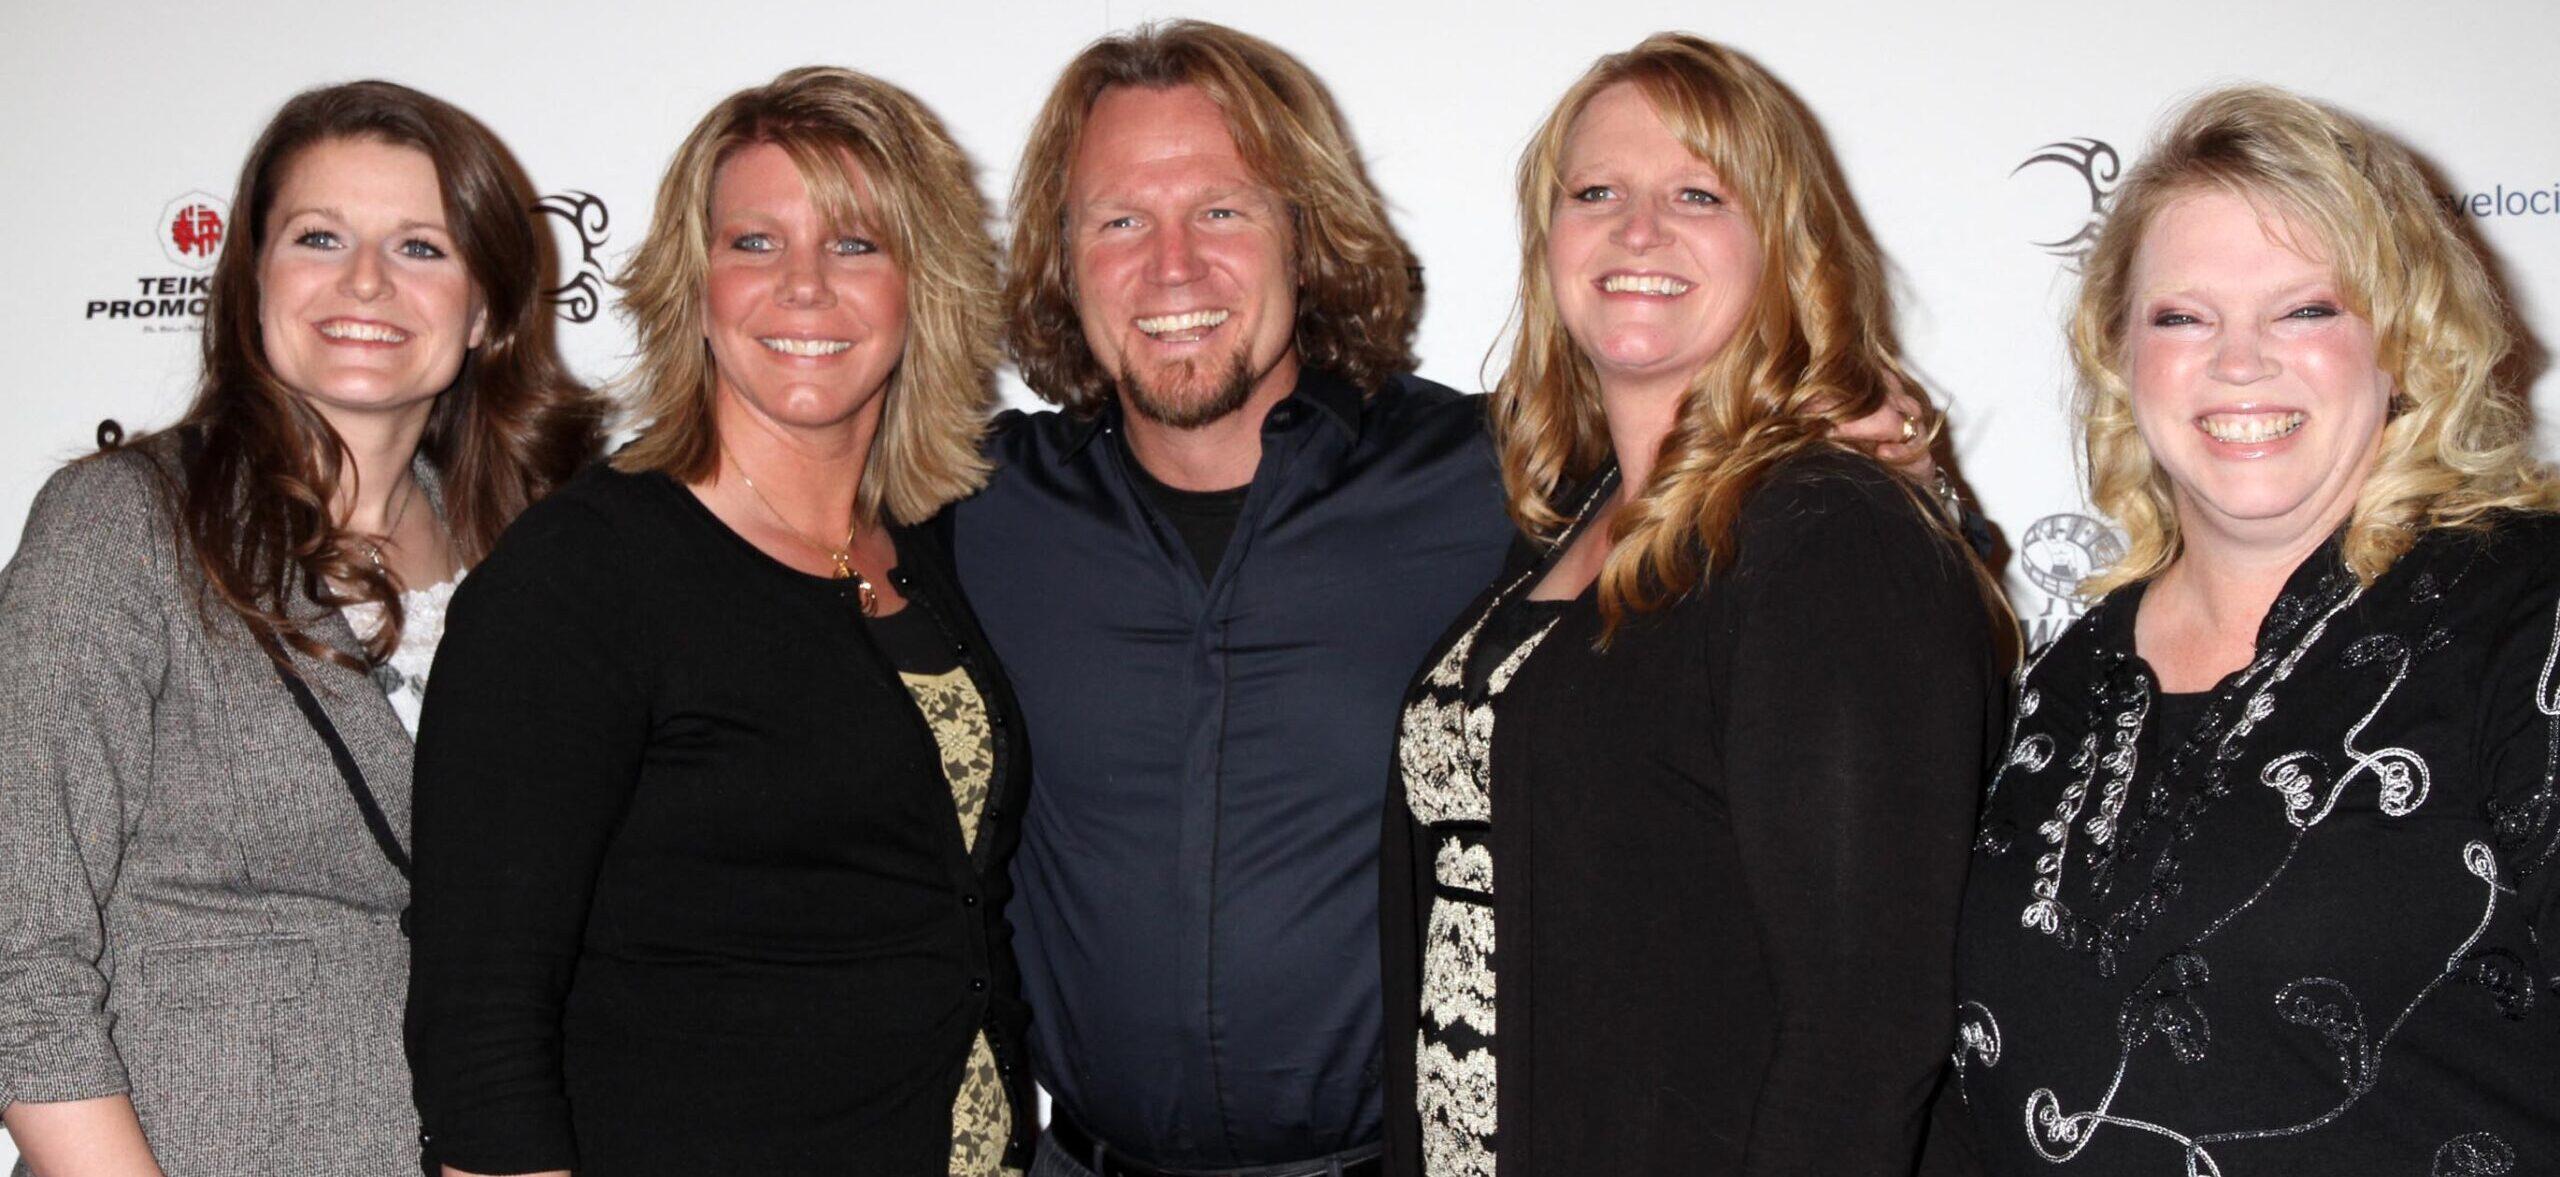 ‘Sister Wives’ Star Kody Brown Talks Not Feeling ‘Safe’ With First Wife